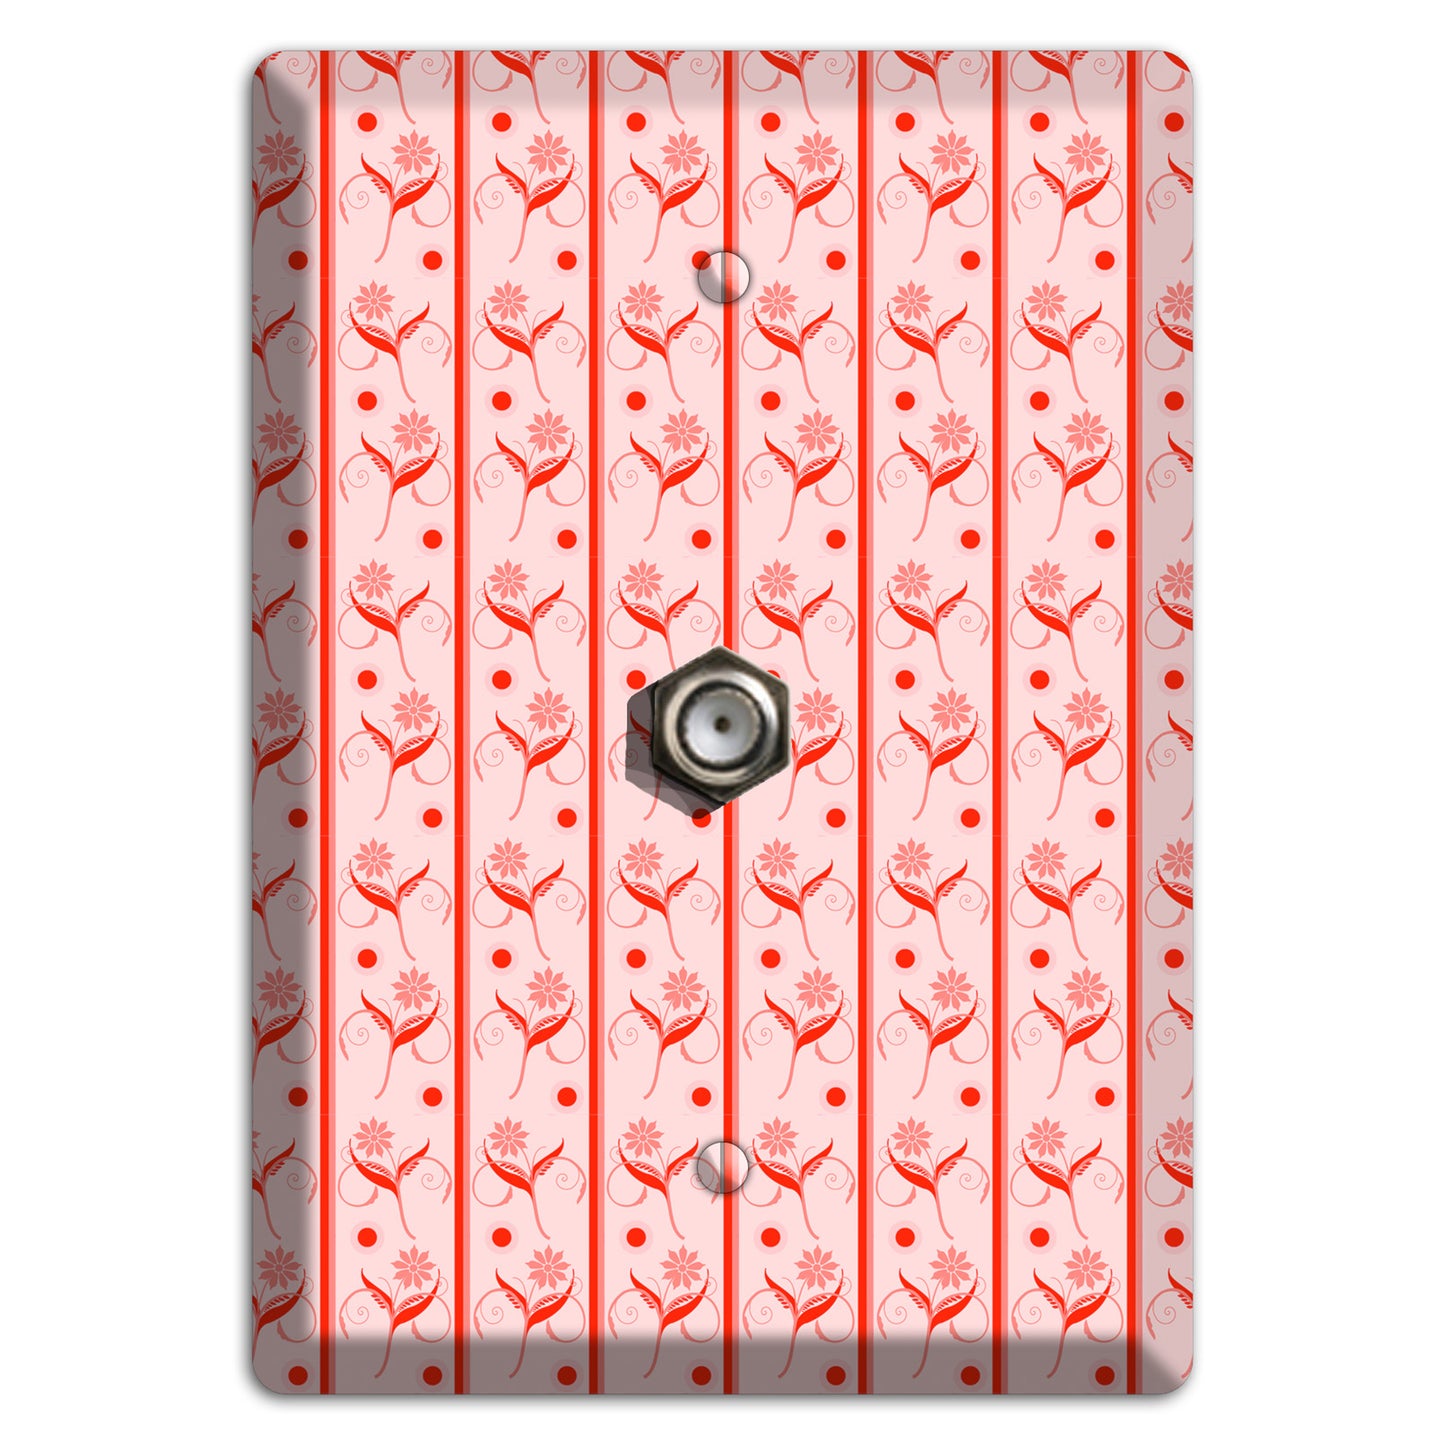 Salmon Floral Pattern Cable Wallplate